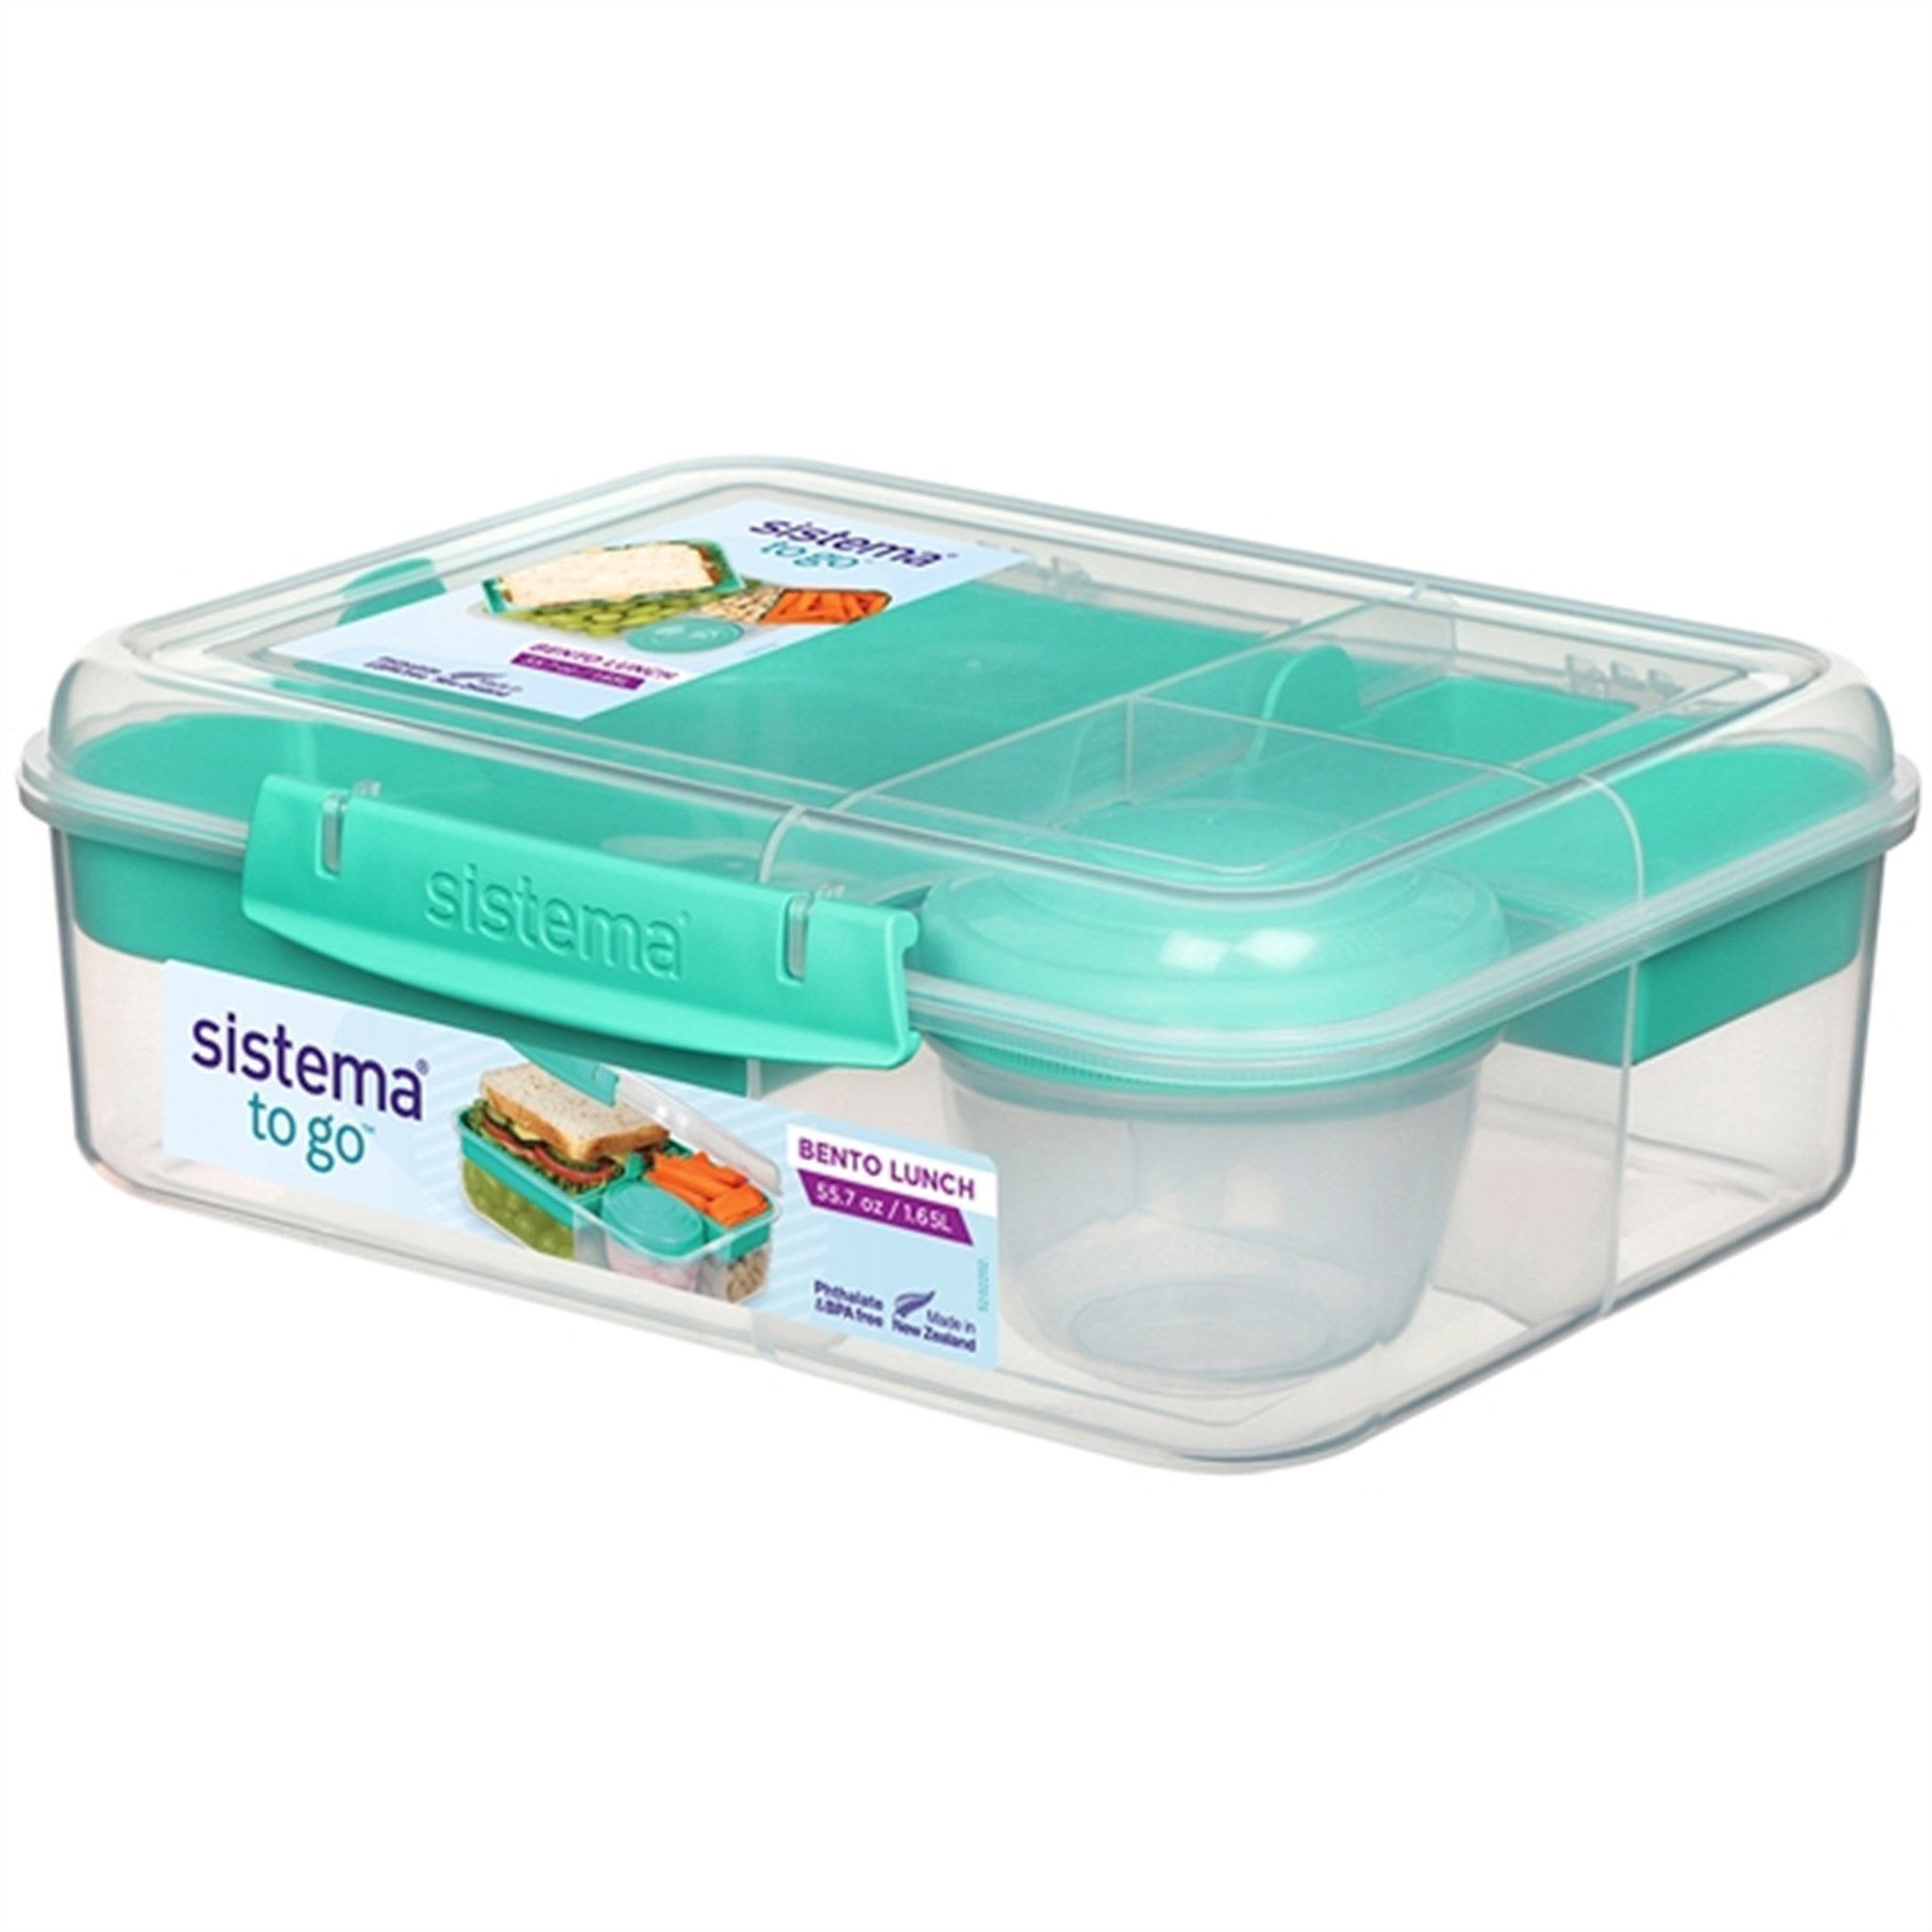 Sistema To Go Bento Lunch Box 1,65 L Minty Teal